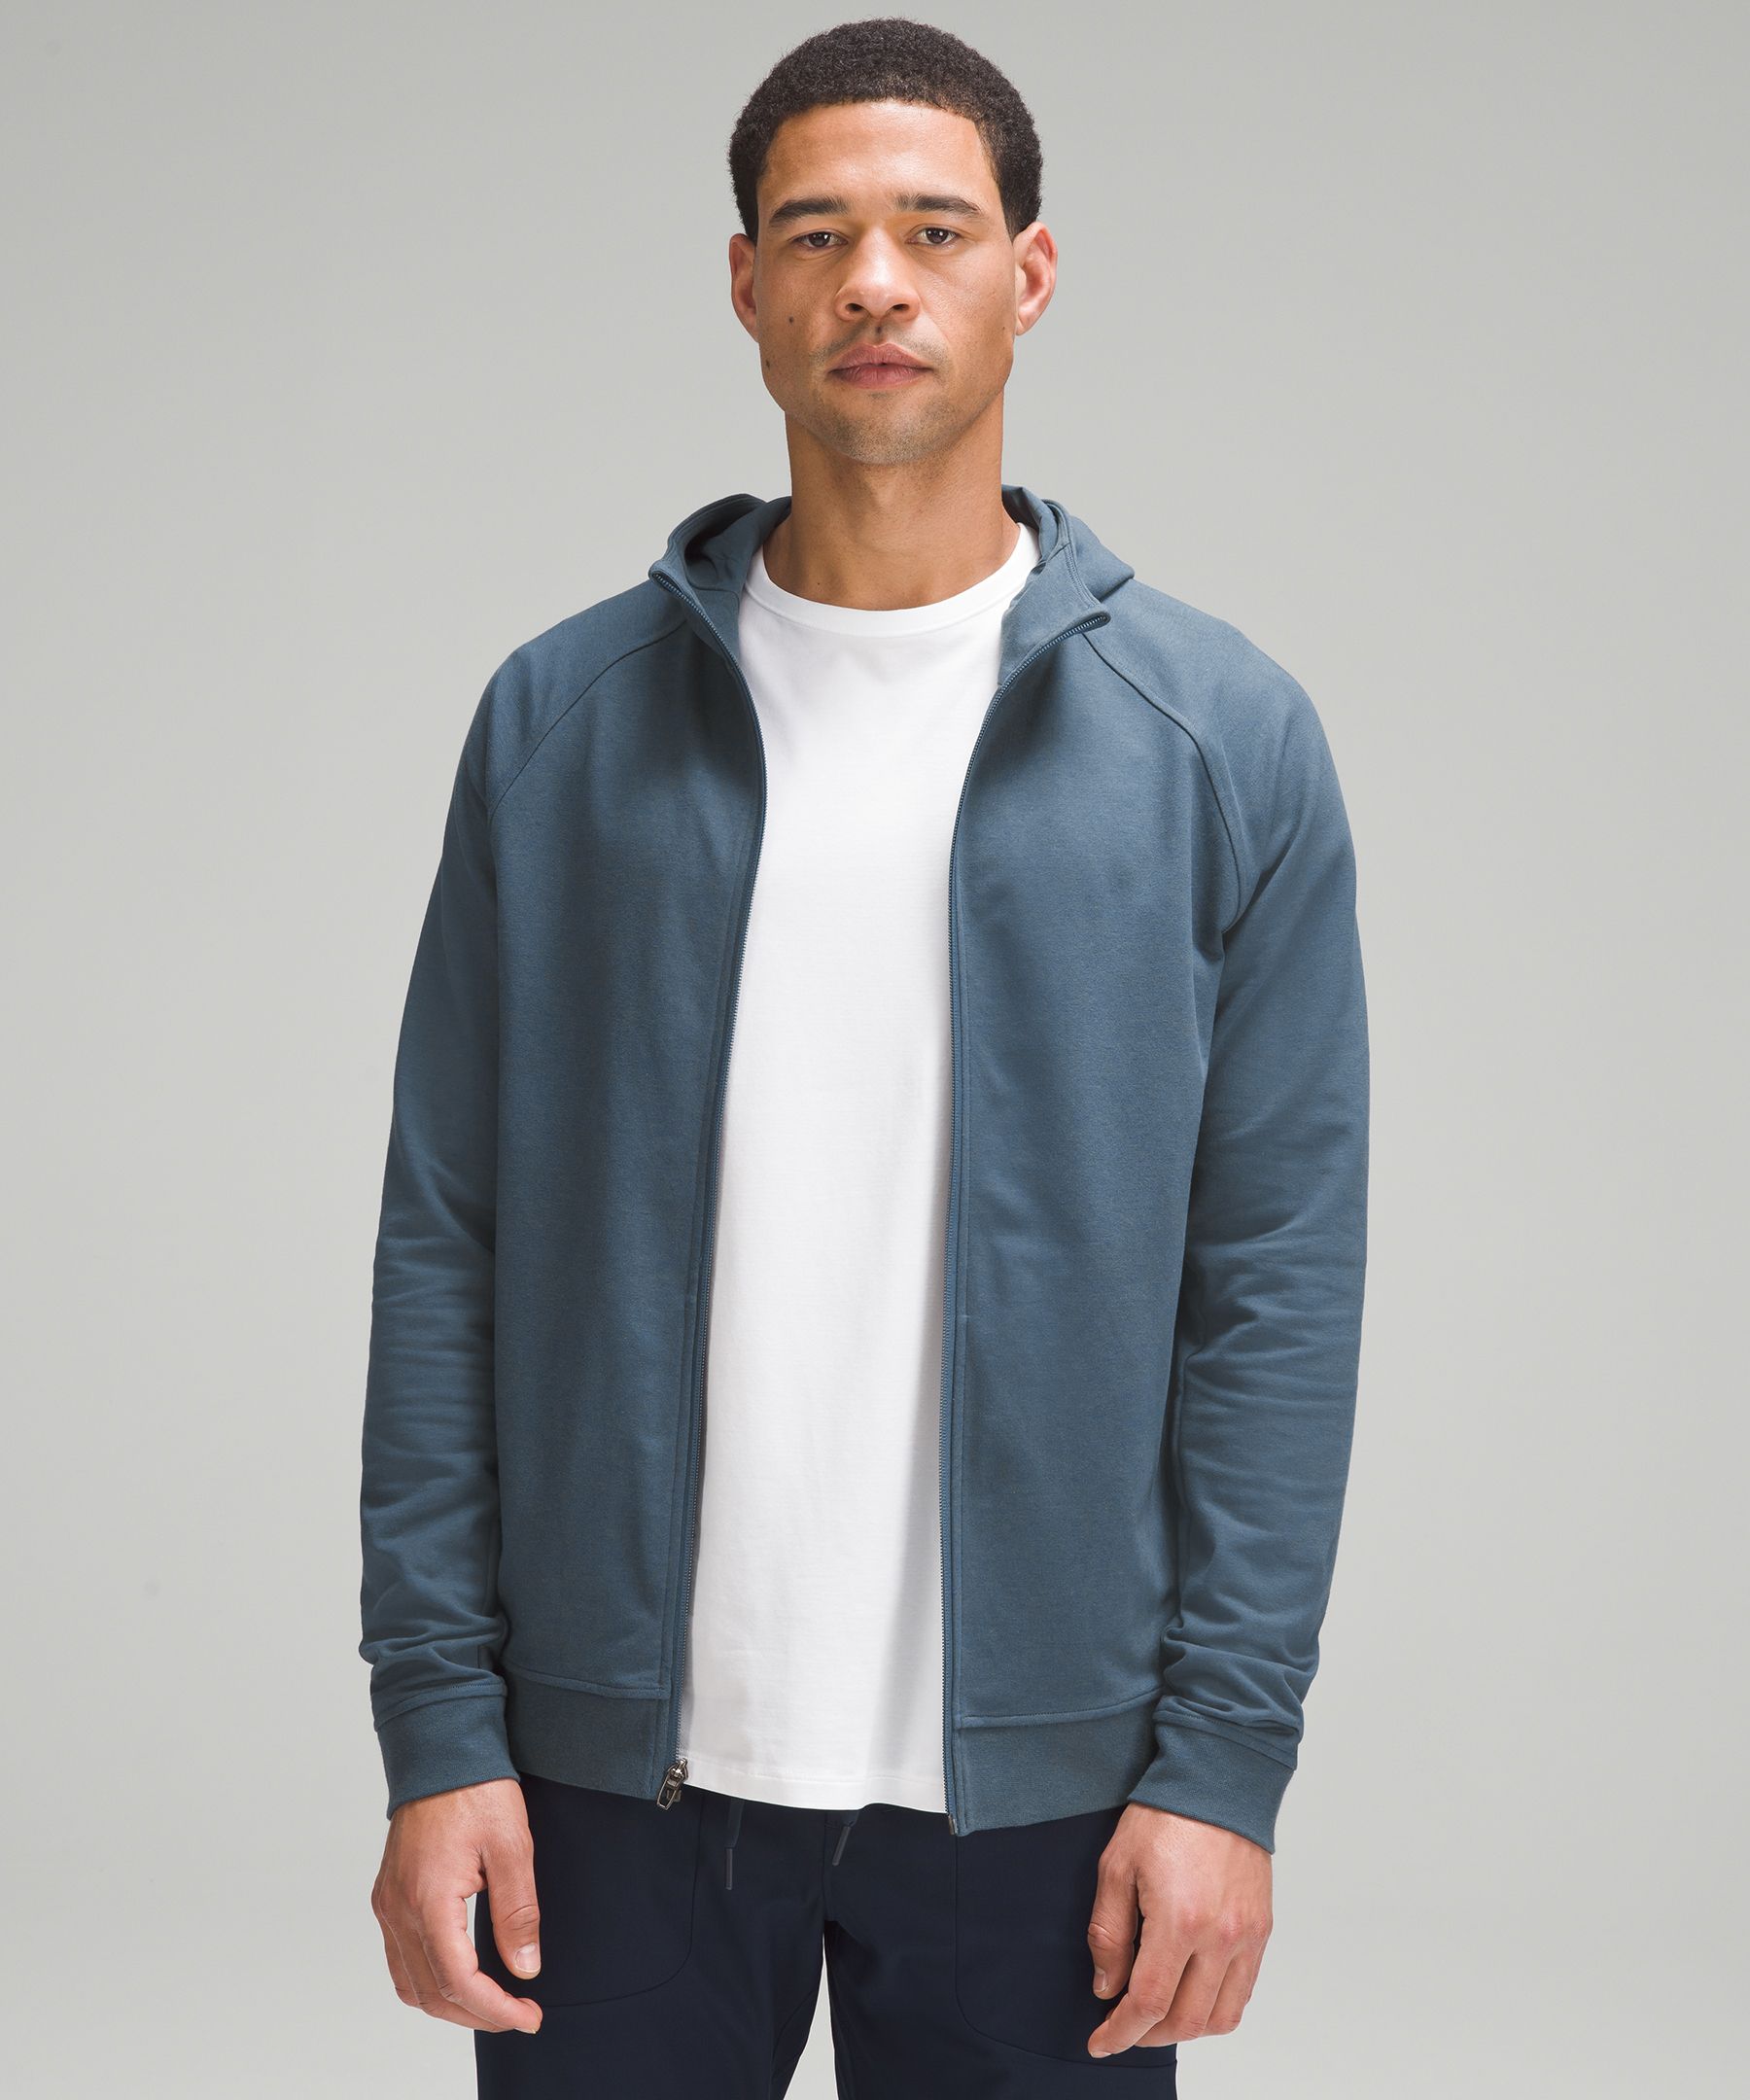 Lululemon City Sweat Pullover Hoodie French Terry - Heathered